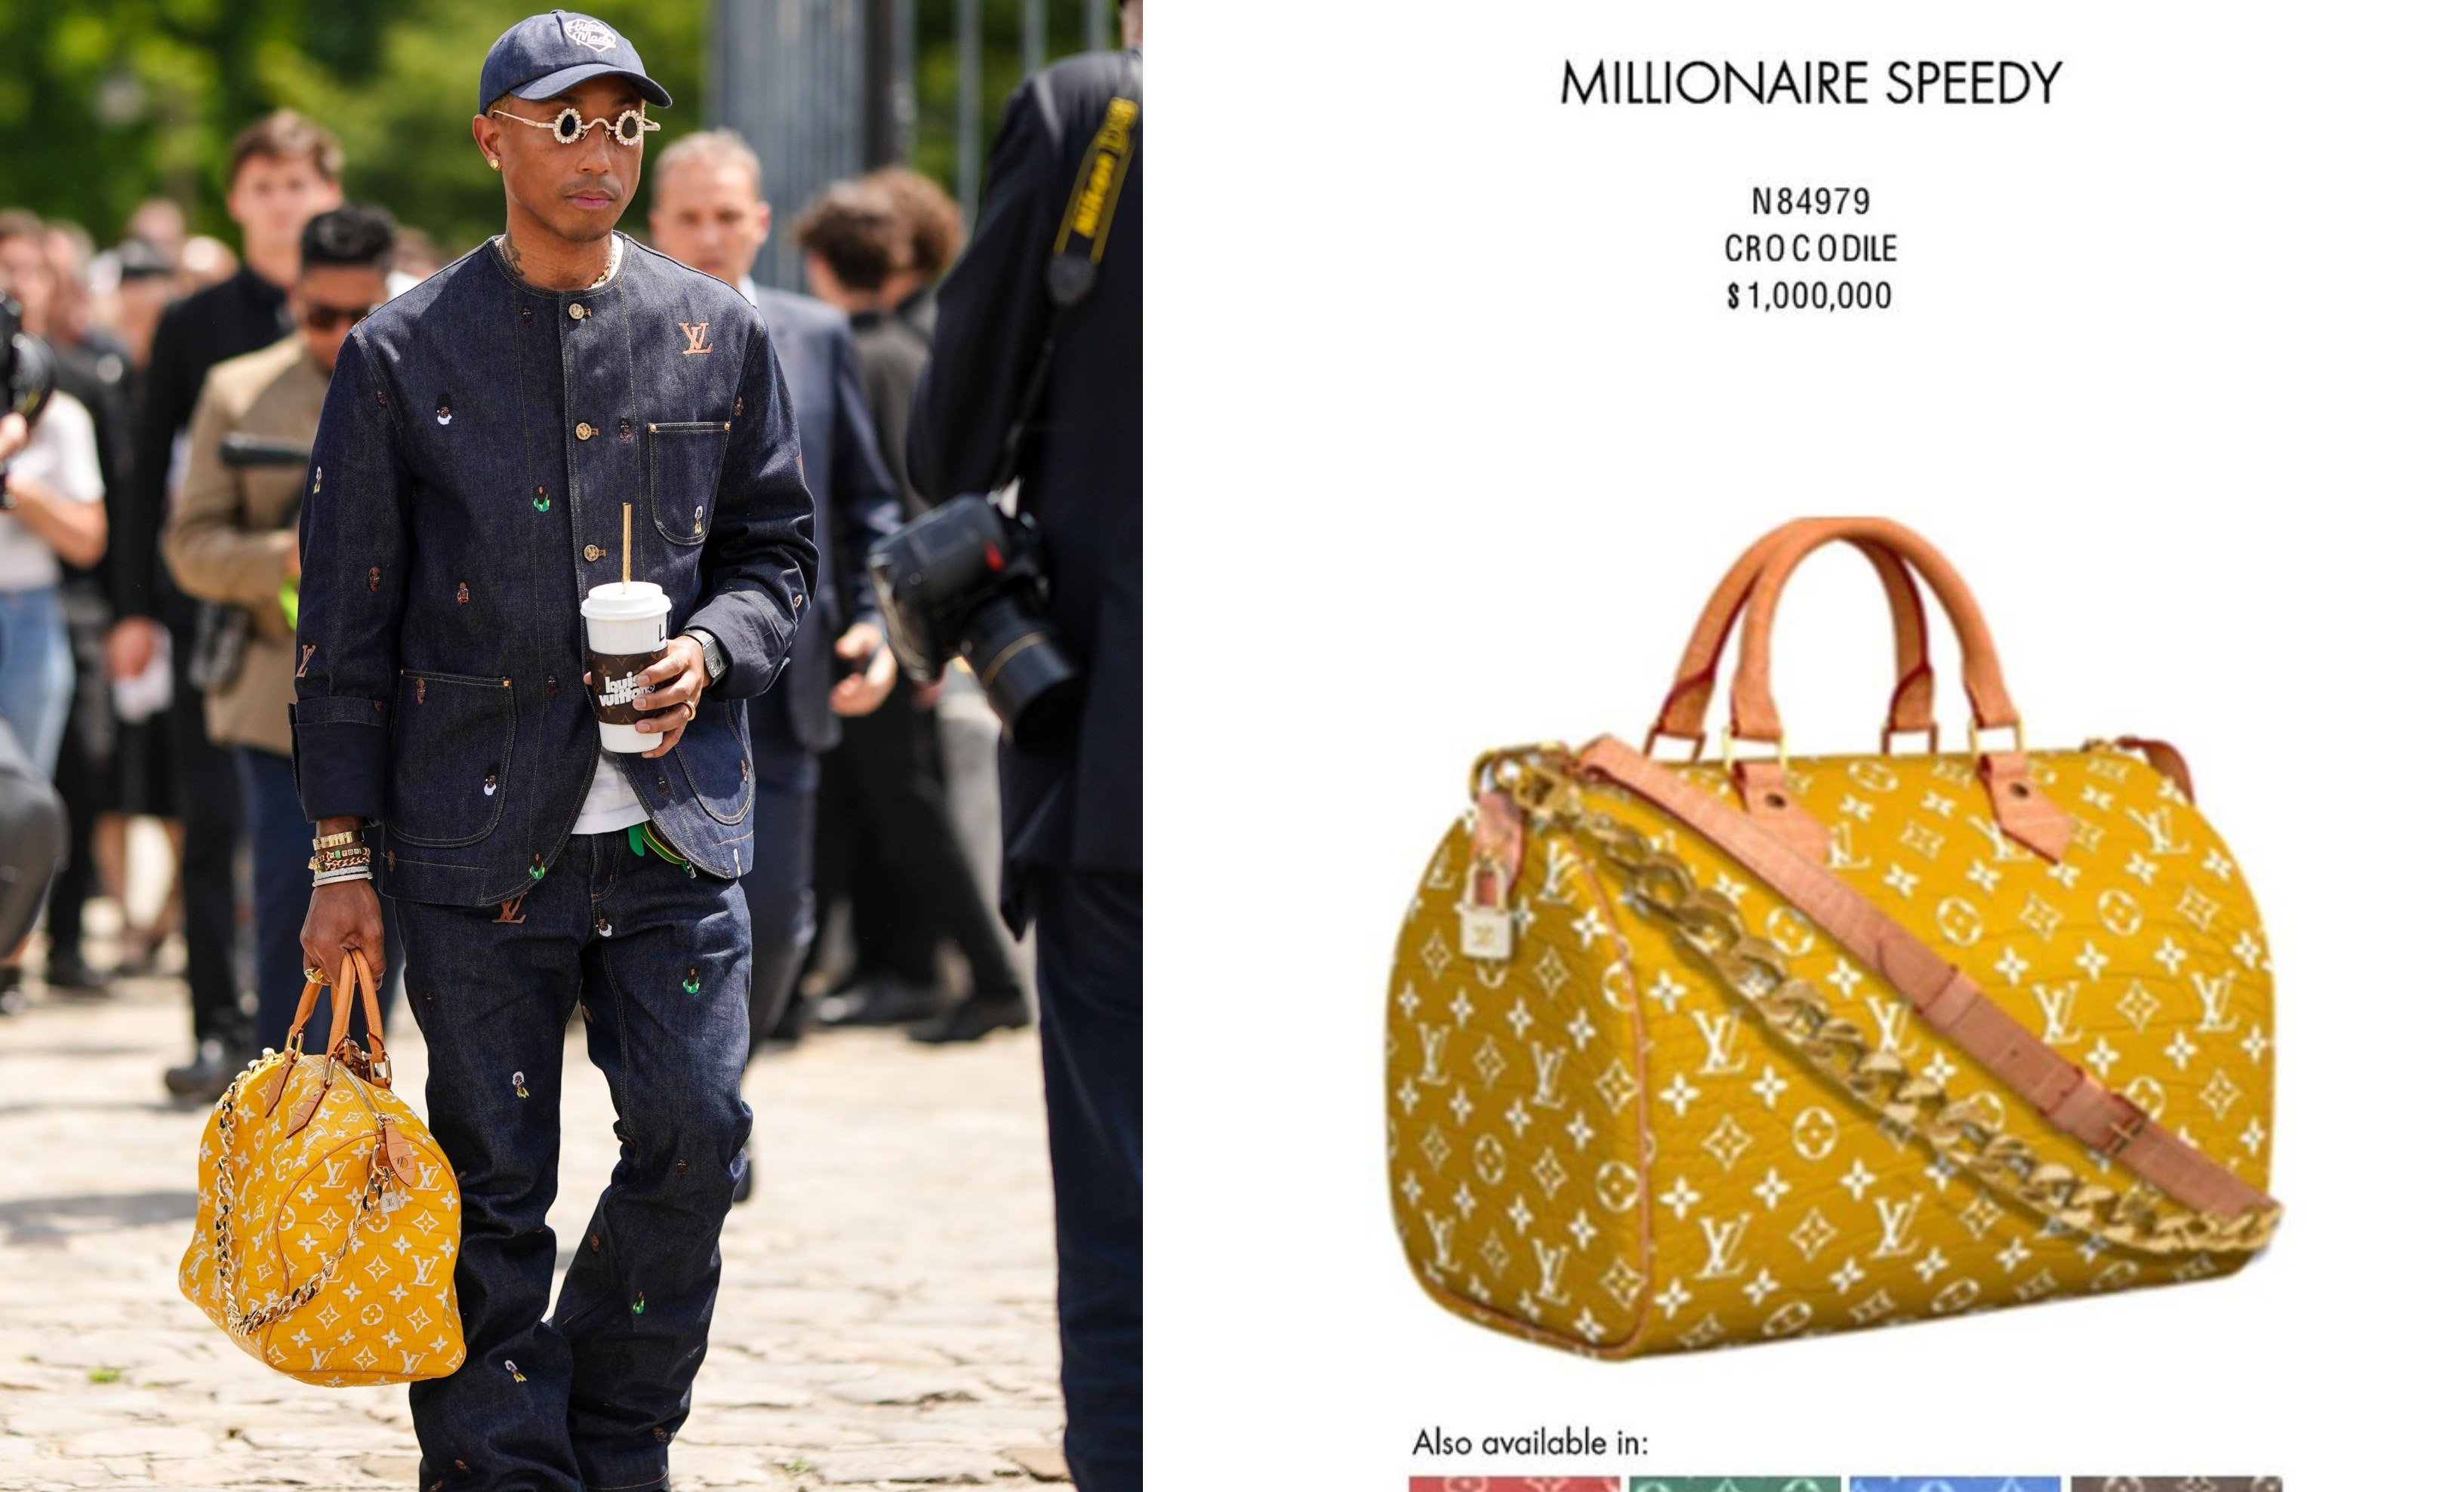 Meet The Most Charming Of All Speedy Bags Yet - BAGAHOLICBOY